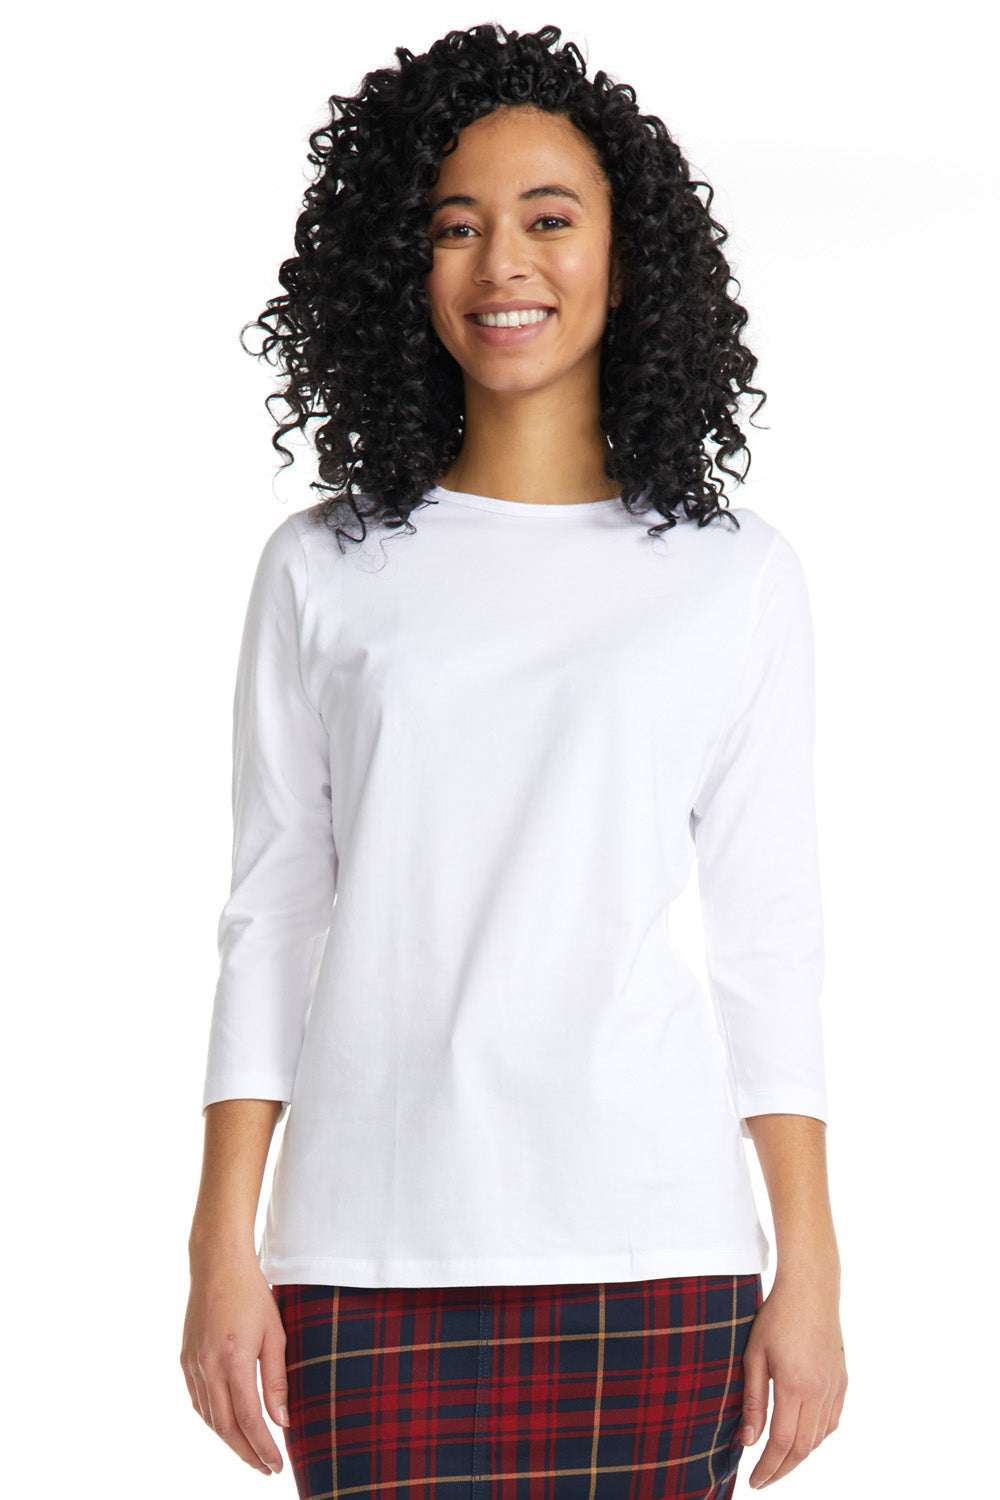 stretchy loose fitting cotton layering shirt 